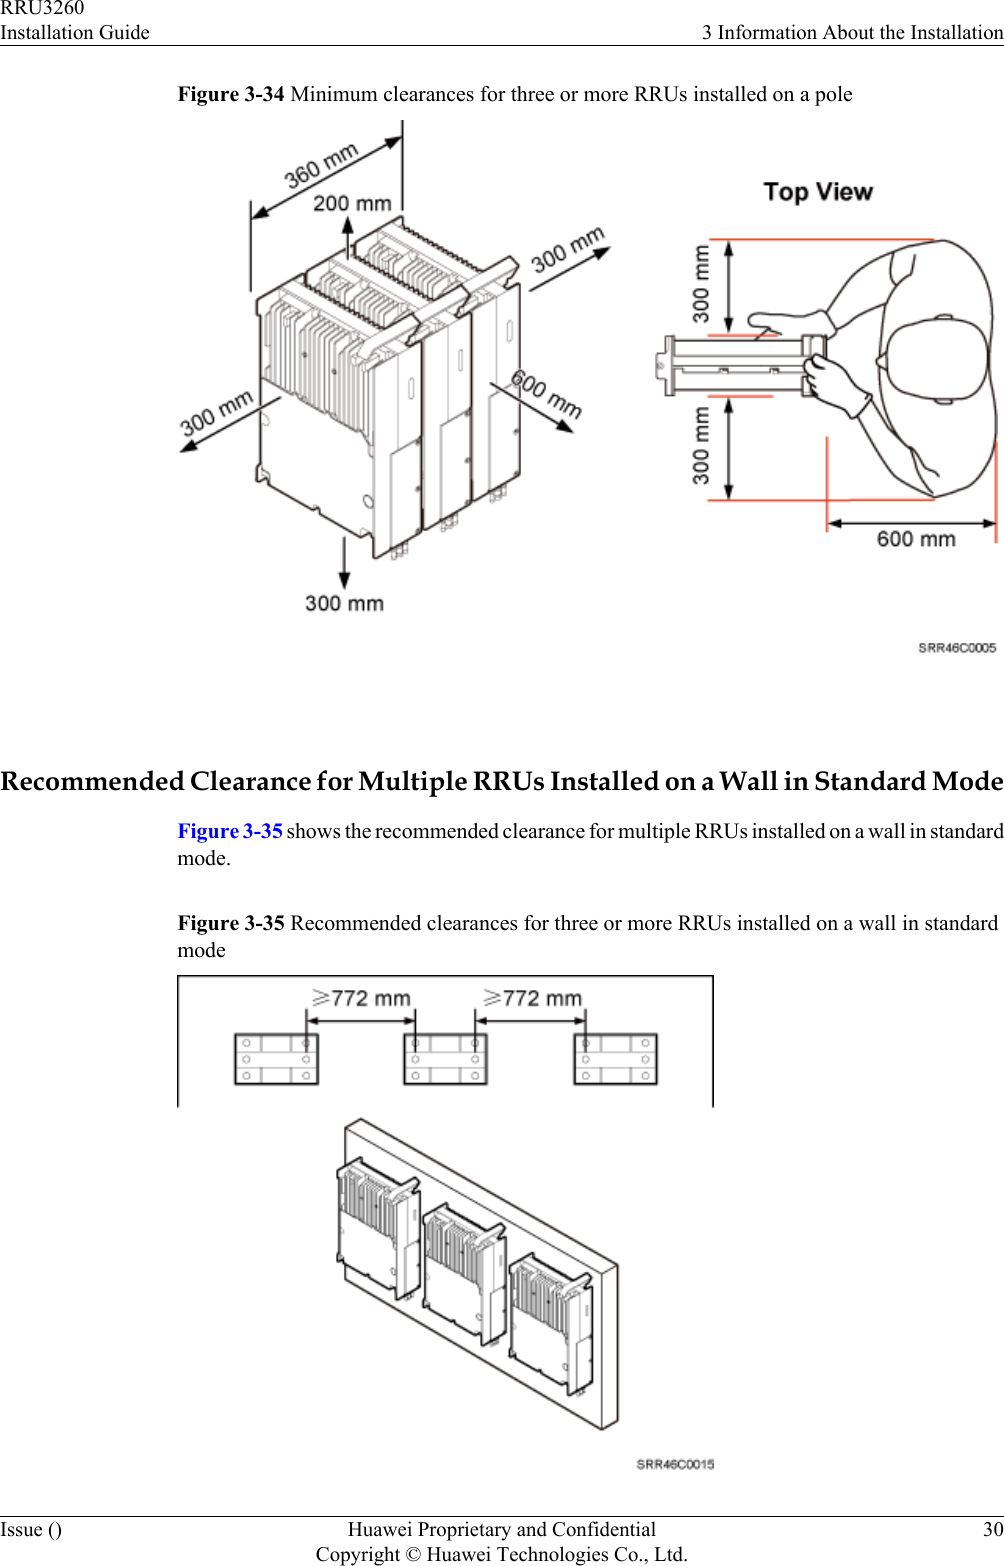 Figure 3-34 Minimum clearances for three or more RRUs installed on a pole Recommended Clearance for Multiple RRUs Installed on a Wall in Standard ModeFigure 3-35 shows the recommended clearance for multiple RRUs installed on a wall in standardmode.Figure 3-35 Recommended clearances for three or more RRUs installed on a wall in standardmodeRRU3260Installation Guide 3 Information About the InstallationIssue () Huawei Proprietary and ConfidentialCopyright © Huawei Technologies Co., Ltd.30